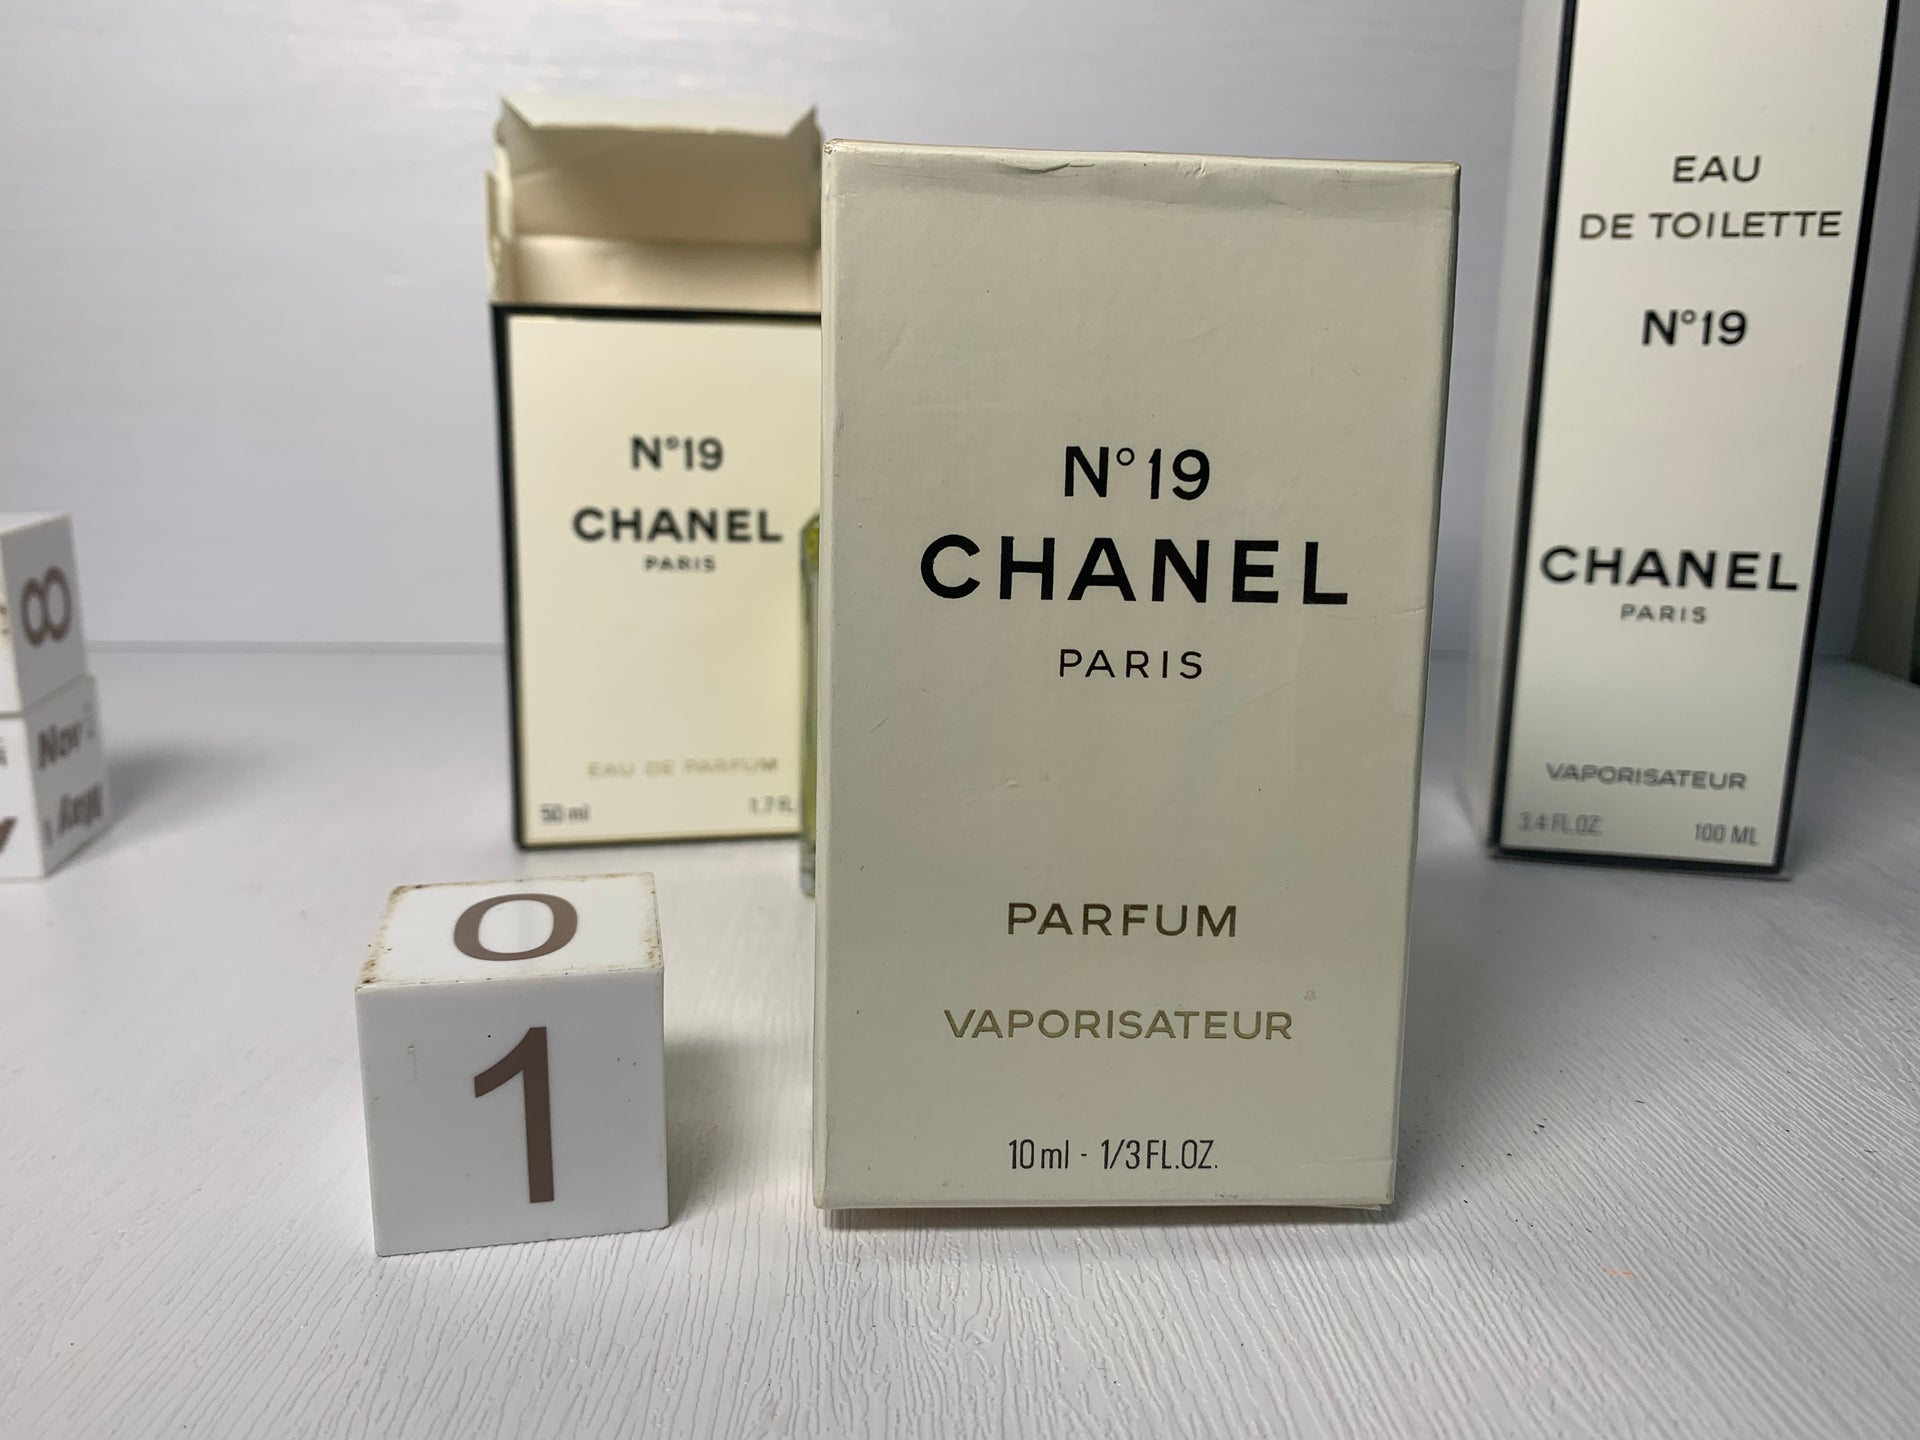 Chanel No 19 edt 100 ml. Vintage 1970s. Sealed – My old perfume